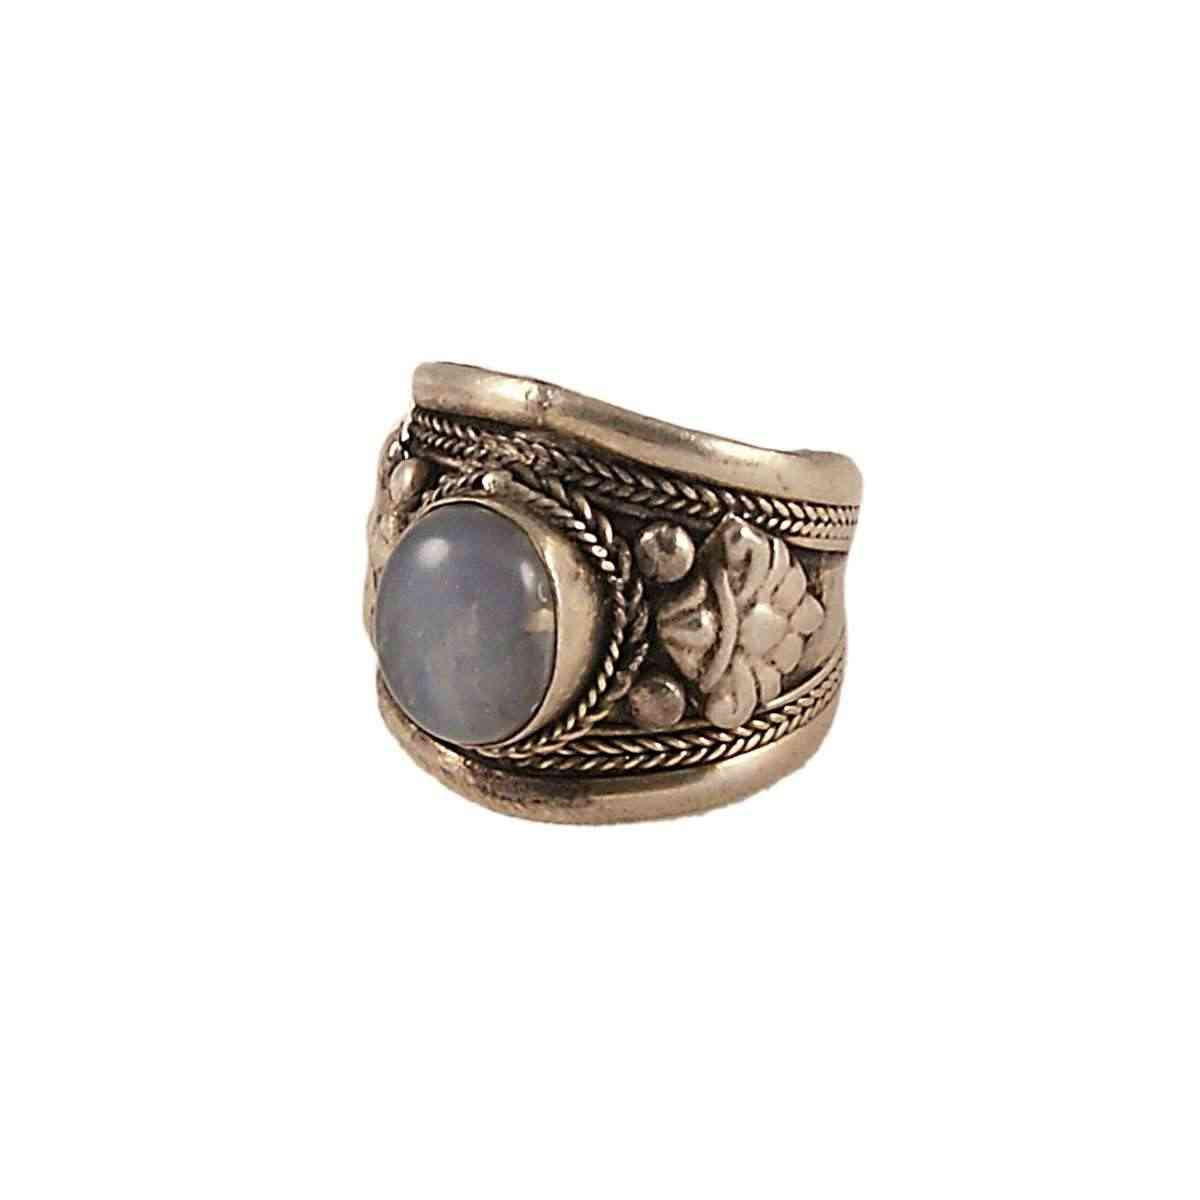 Nepalese Ring - Single White Stone - Wide